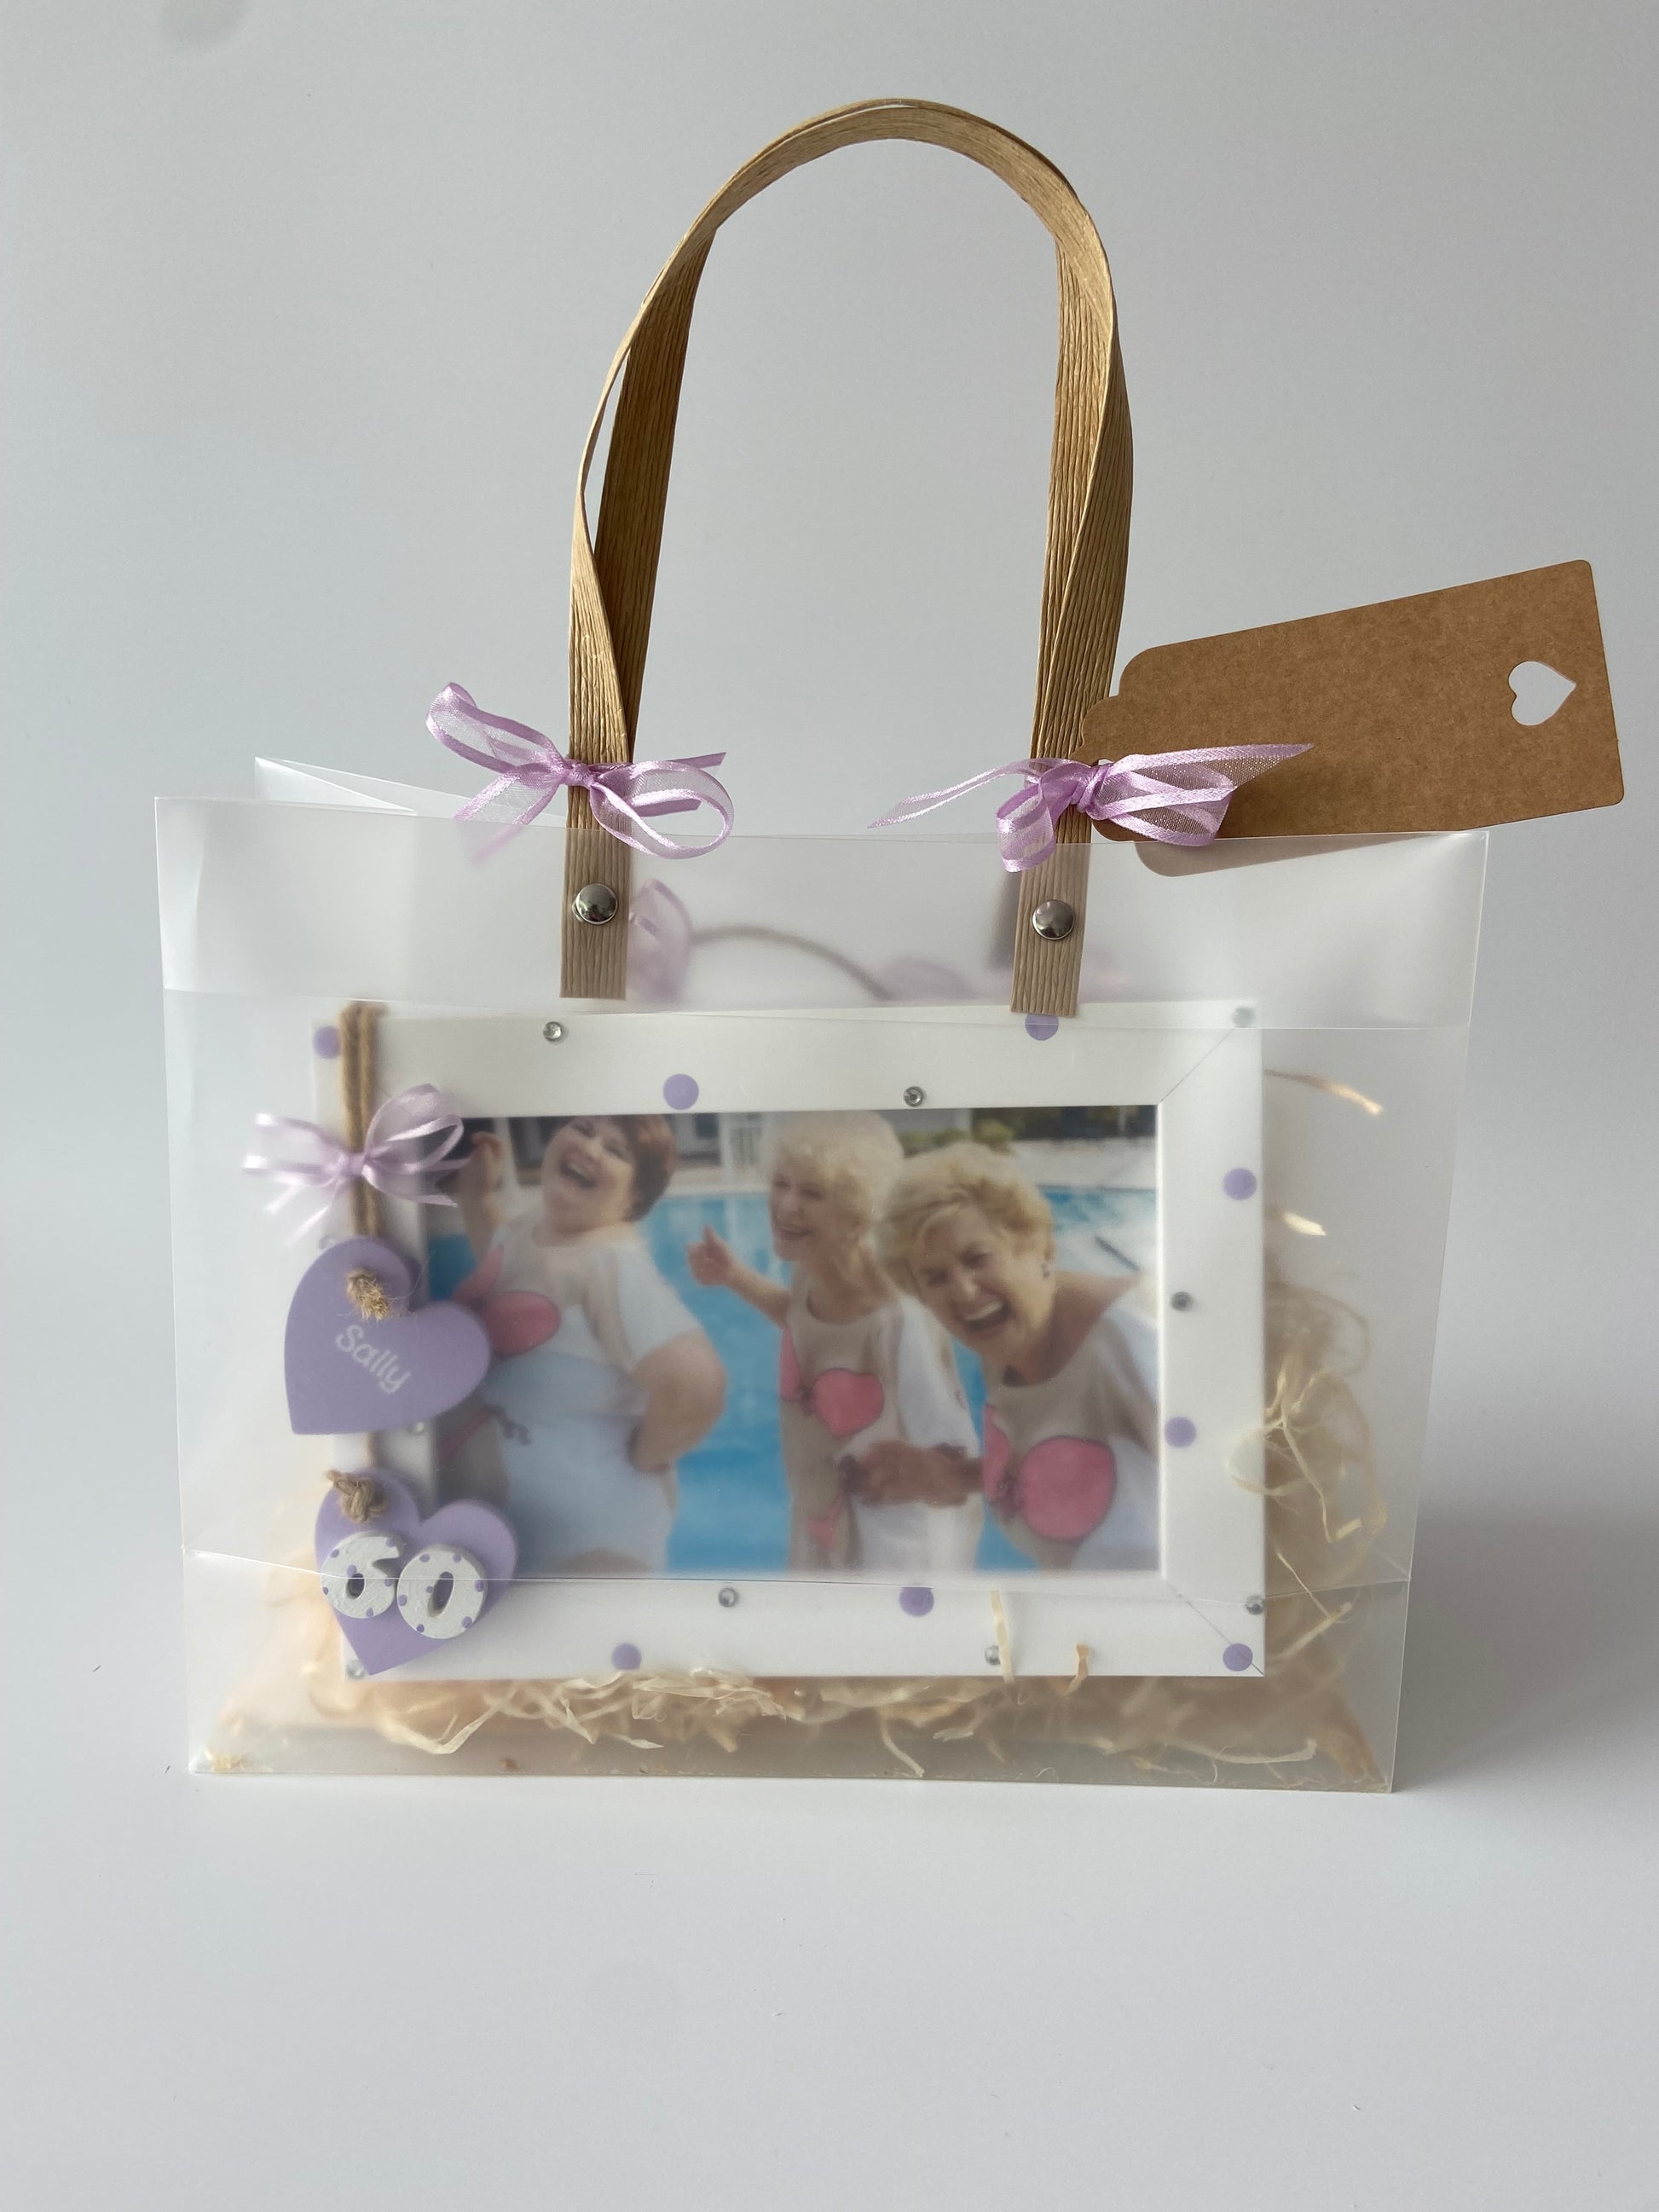 Image shows a lilac photo frame for a 60th birthday, includes gems, polka dots and ribbon